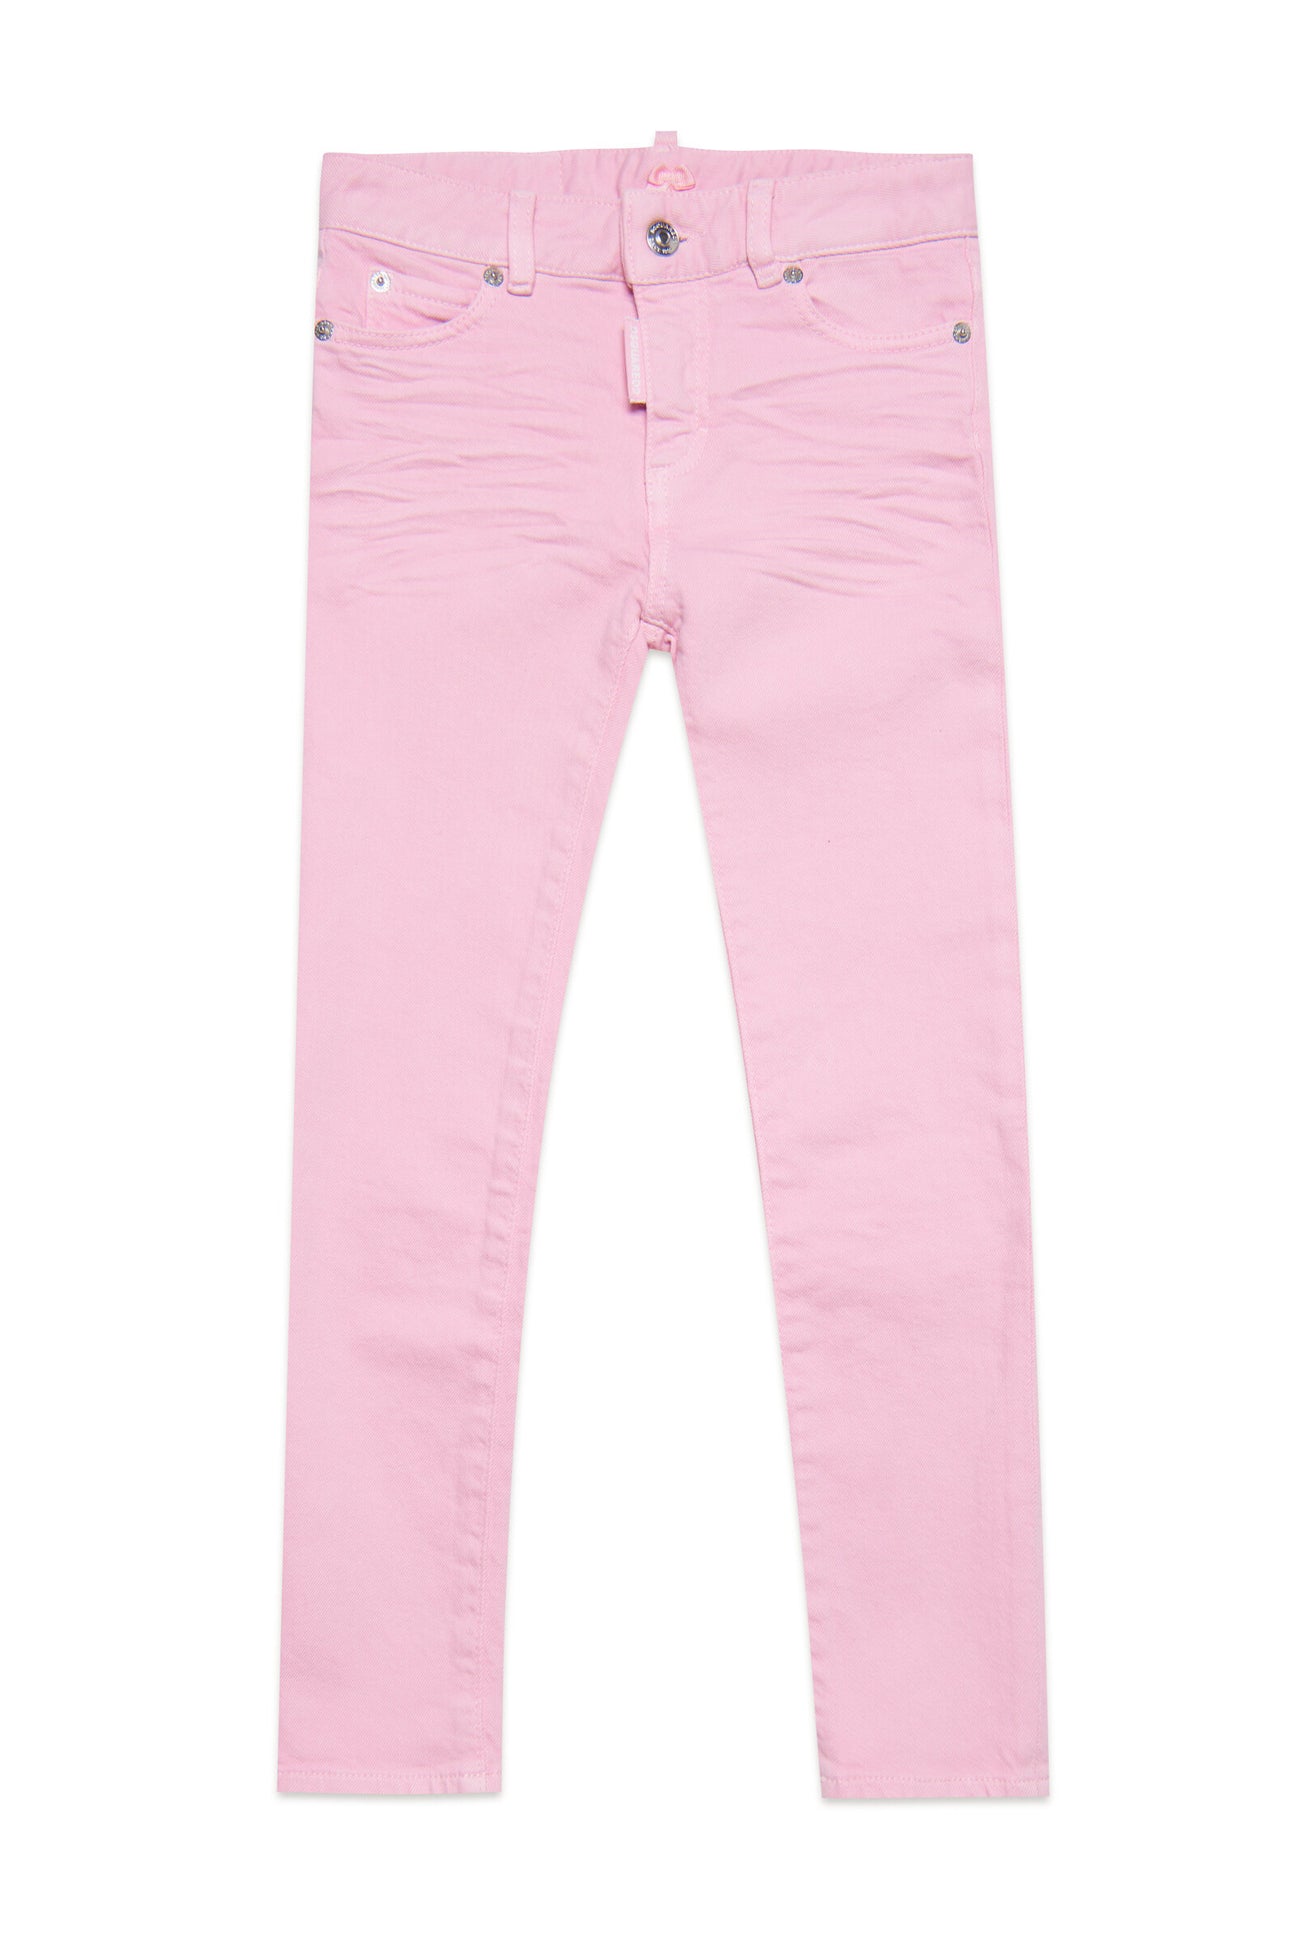 Twiggy skinny jeans in colorful organic cotton 